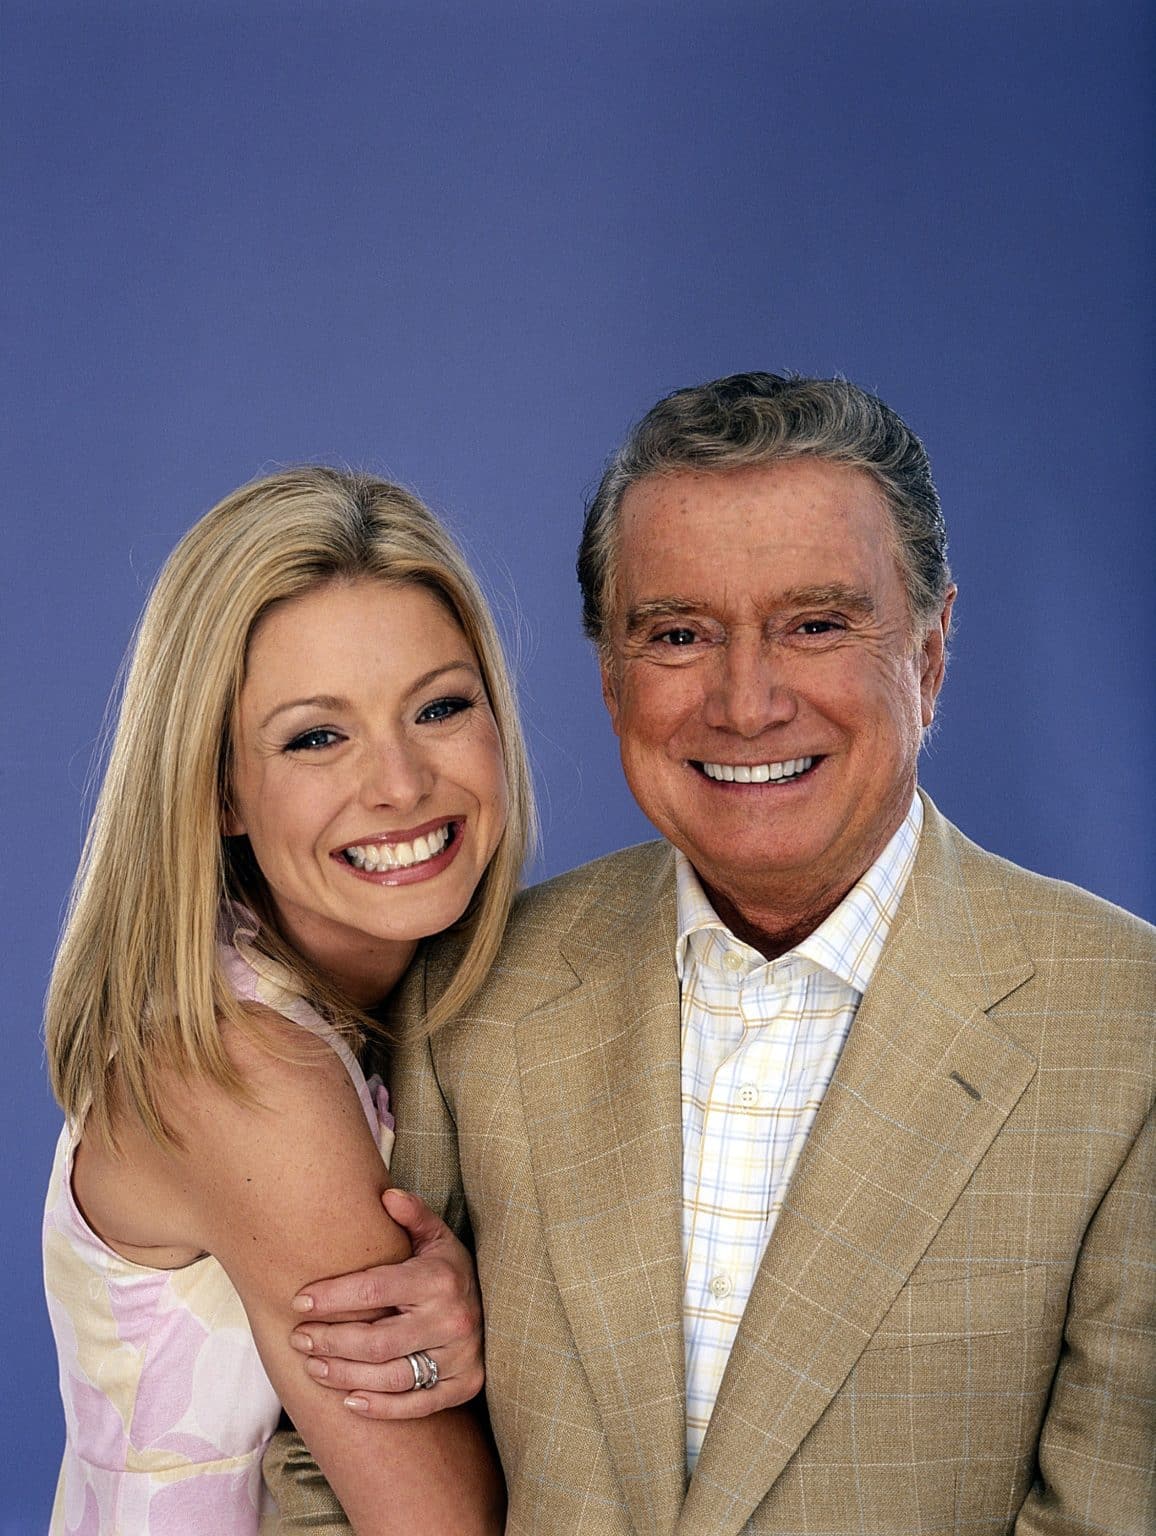 Kelly Ripa Says It Was Often Difficult To Work With The Late Regis Philbin